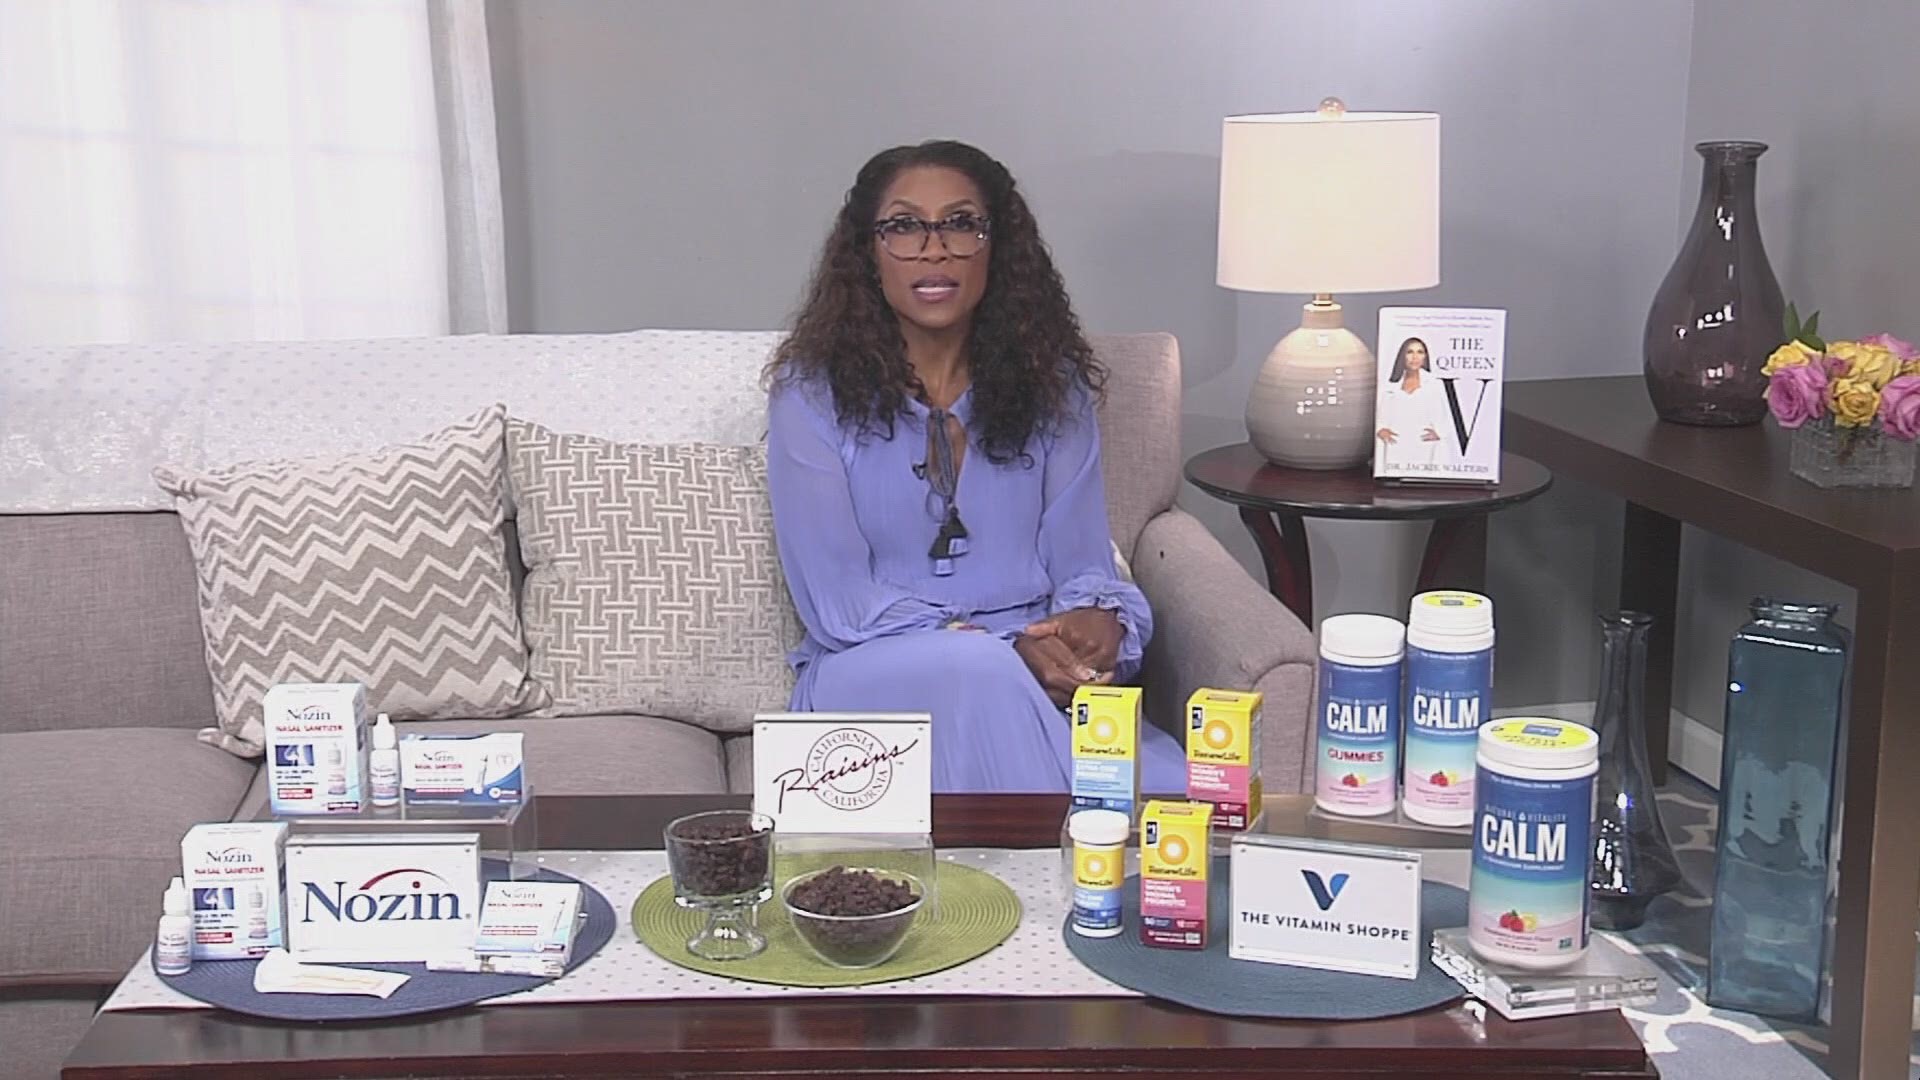 Celebrate National Wellness Month with Dr. Jacqueline Walters, MD. This is a paid segment for The Vitamin Shoppe, California Grapes and Nozin, and Nasal Sanitizer.